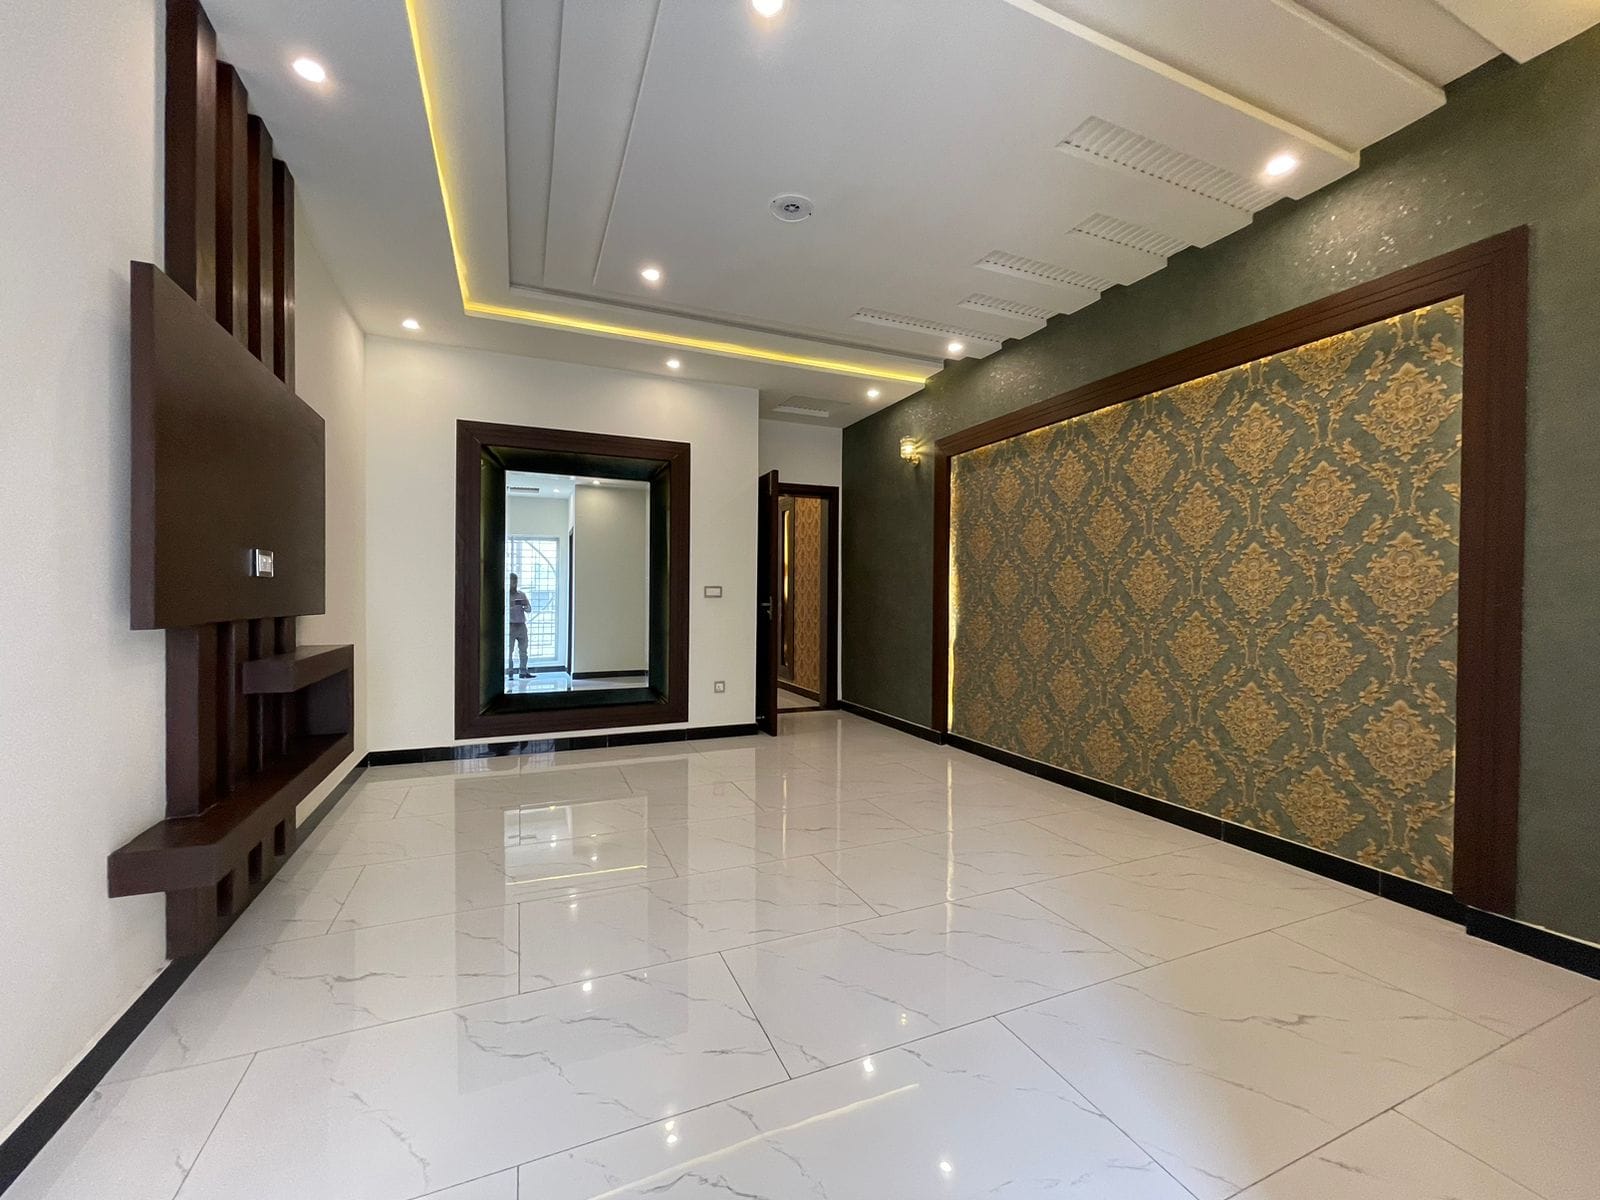 14 MARLA FACING PARK HOUSE FOR SALE in JOHAR TOWN LAHORE